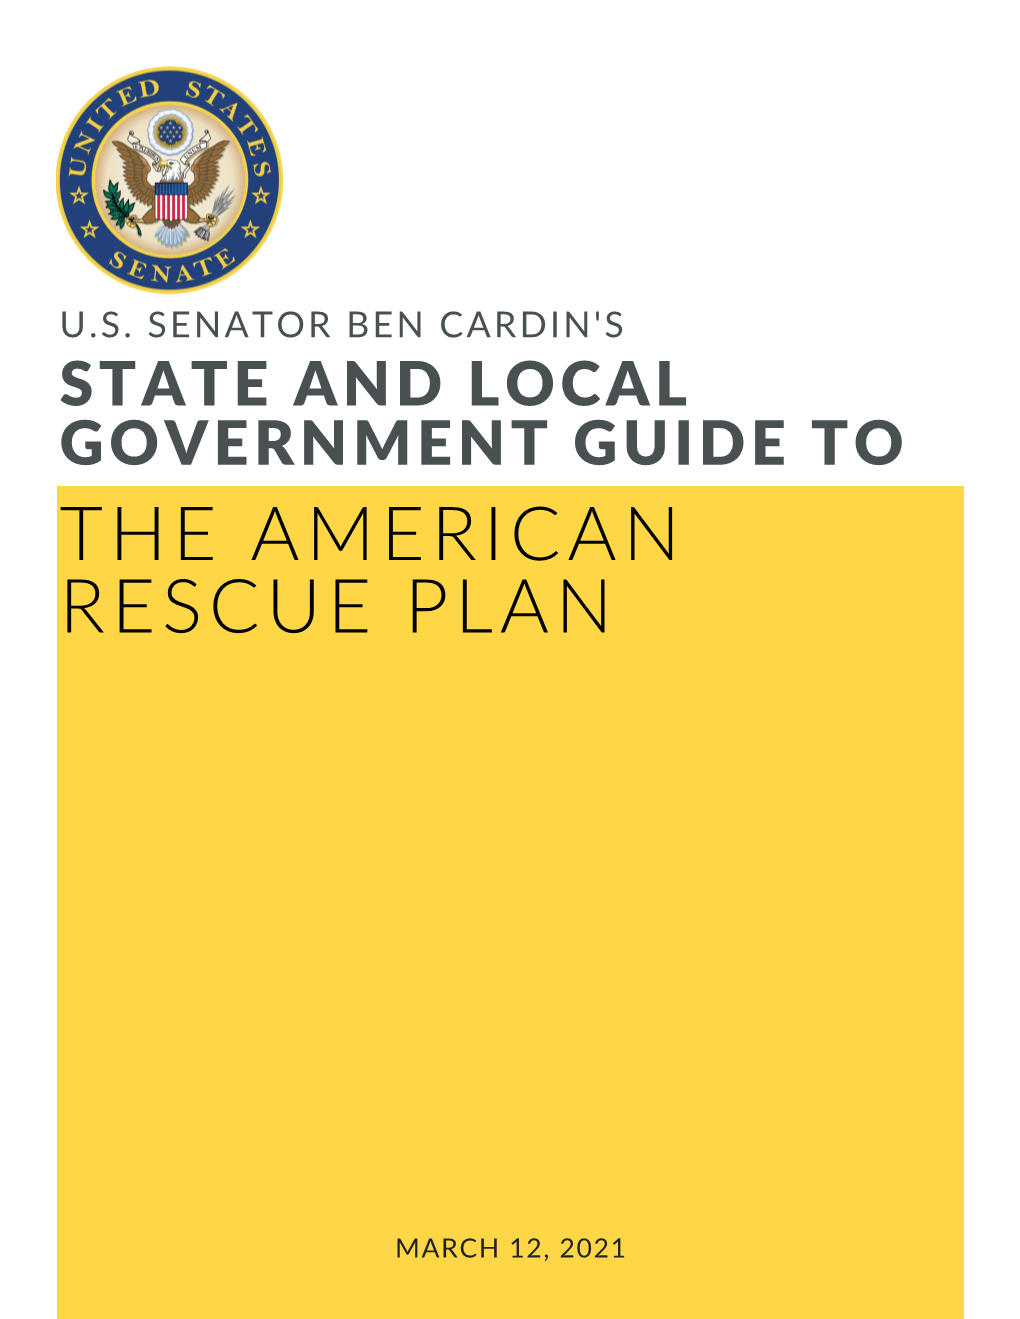 State and Local Guide to the American Rescue Plan